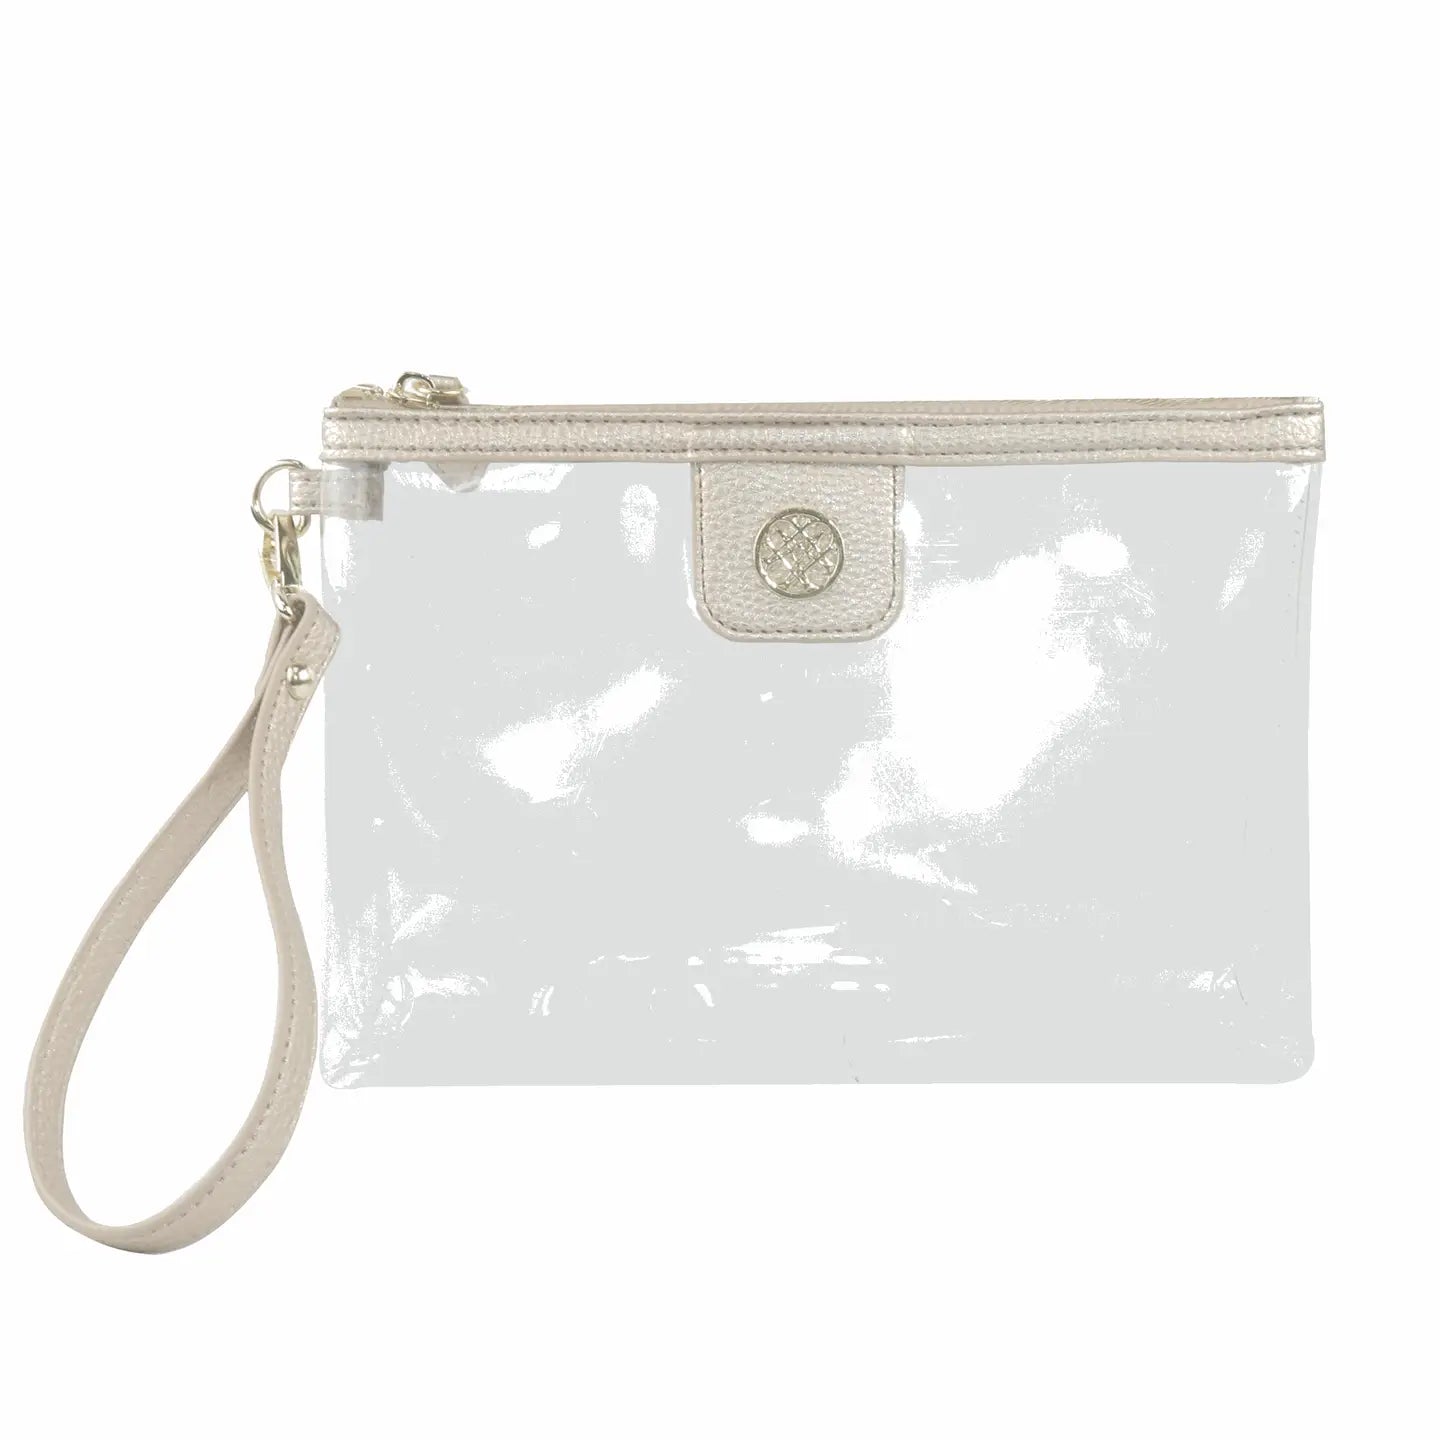 Natalie Wood - Clearly Fabulous Clear Wristlet in Gold Metallic-130 Accessories-Natalie Wood-July & June Women's Fashion Boutique Located in San Antonio, Texas